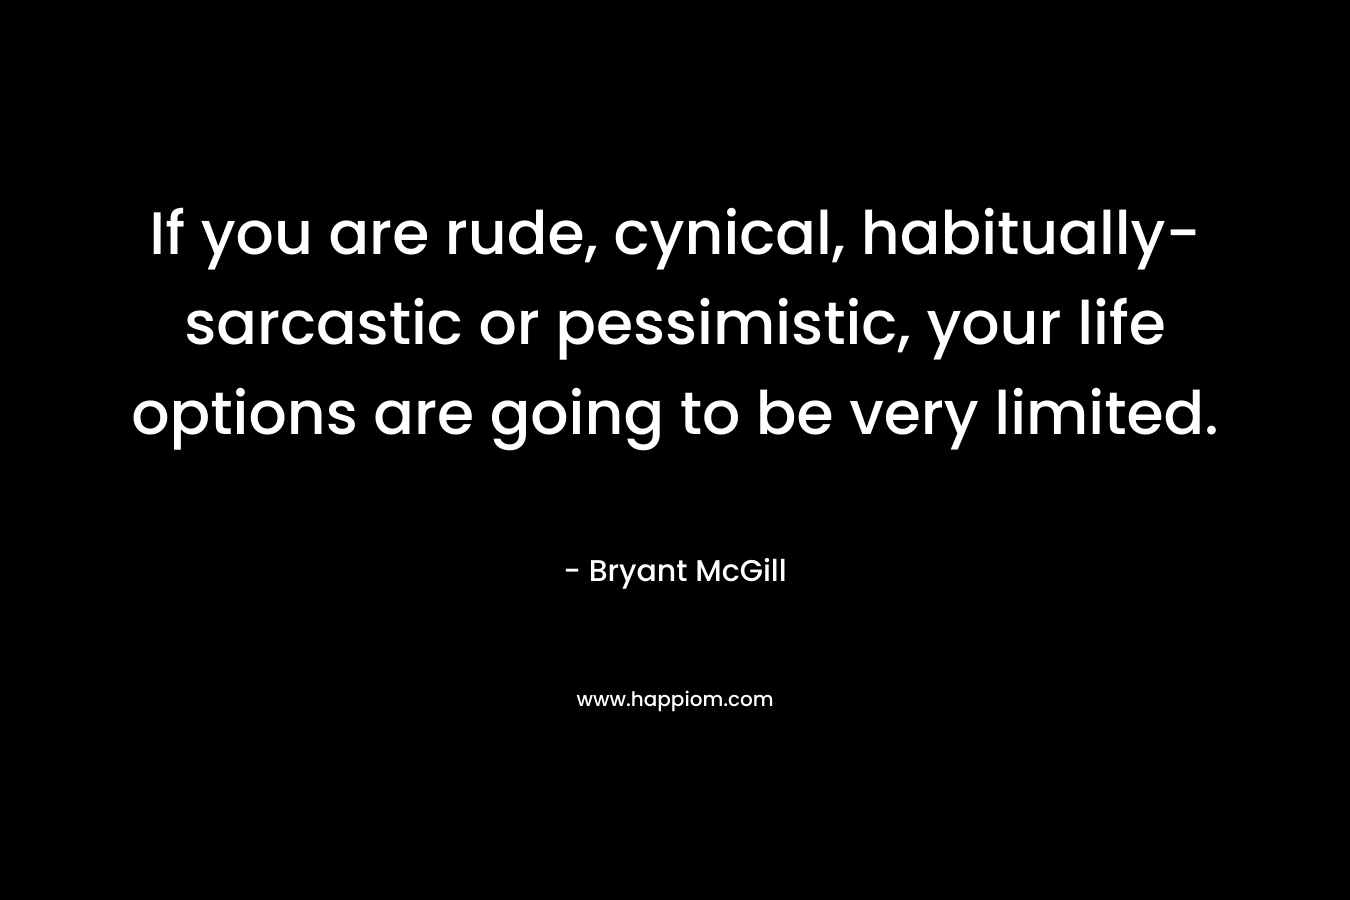 If you are rude, cynical, habitually-sarcastic or pessimistic, your life options are going to be very limited.